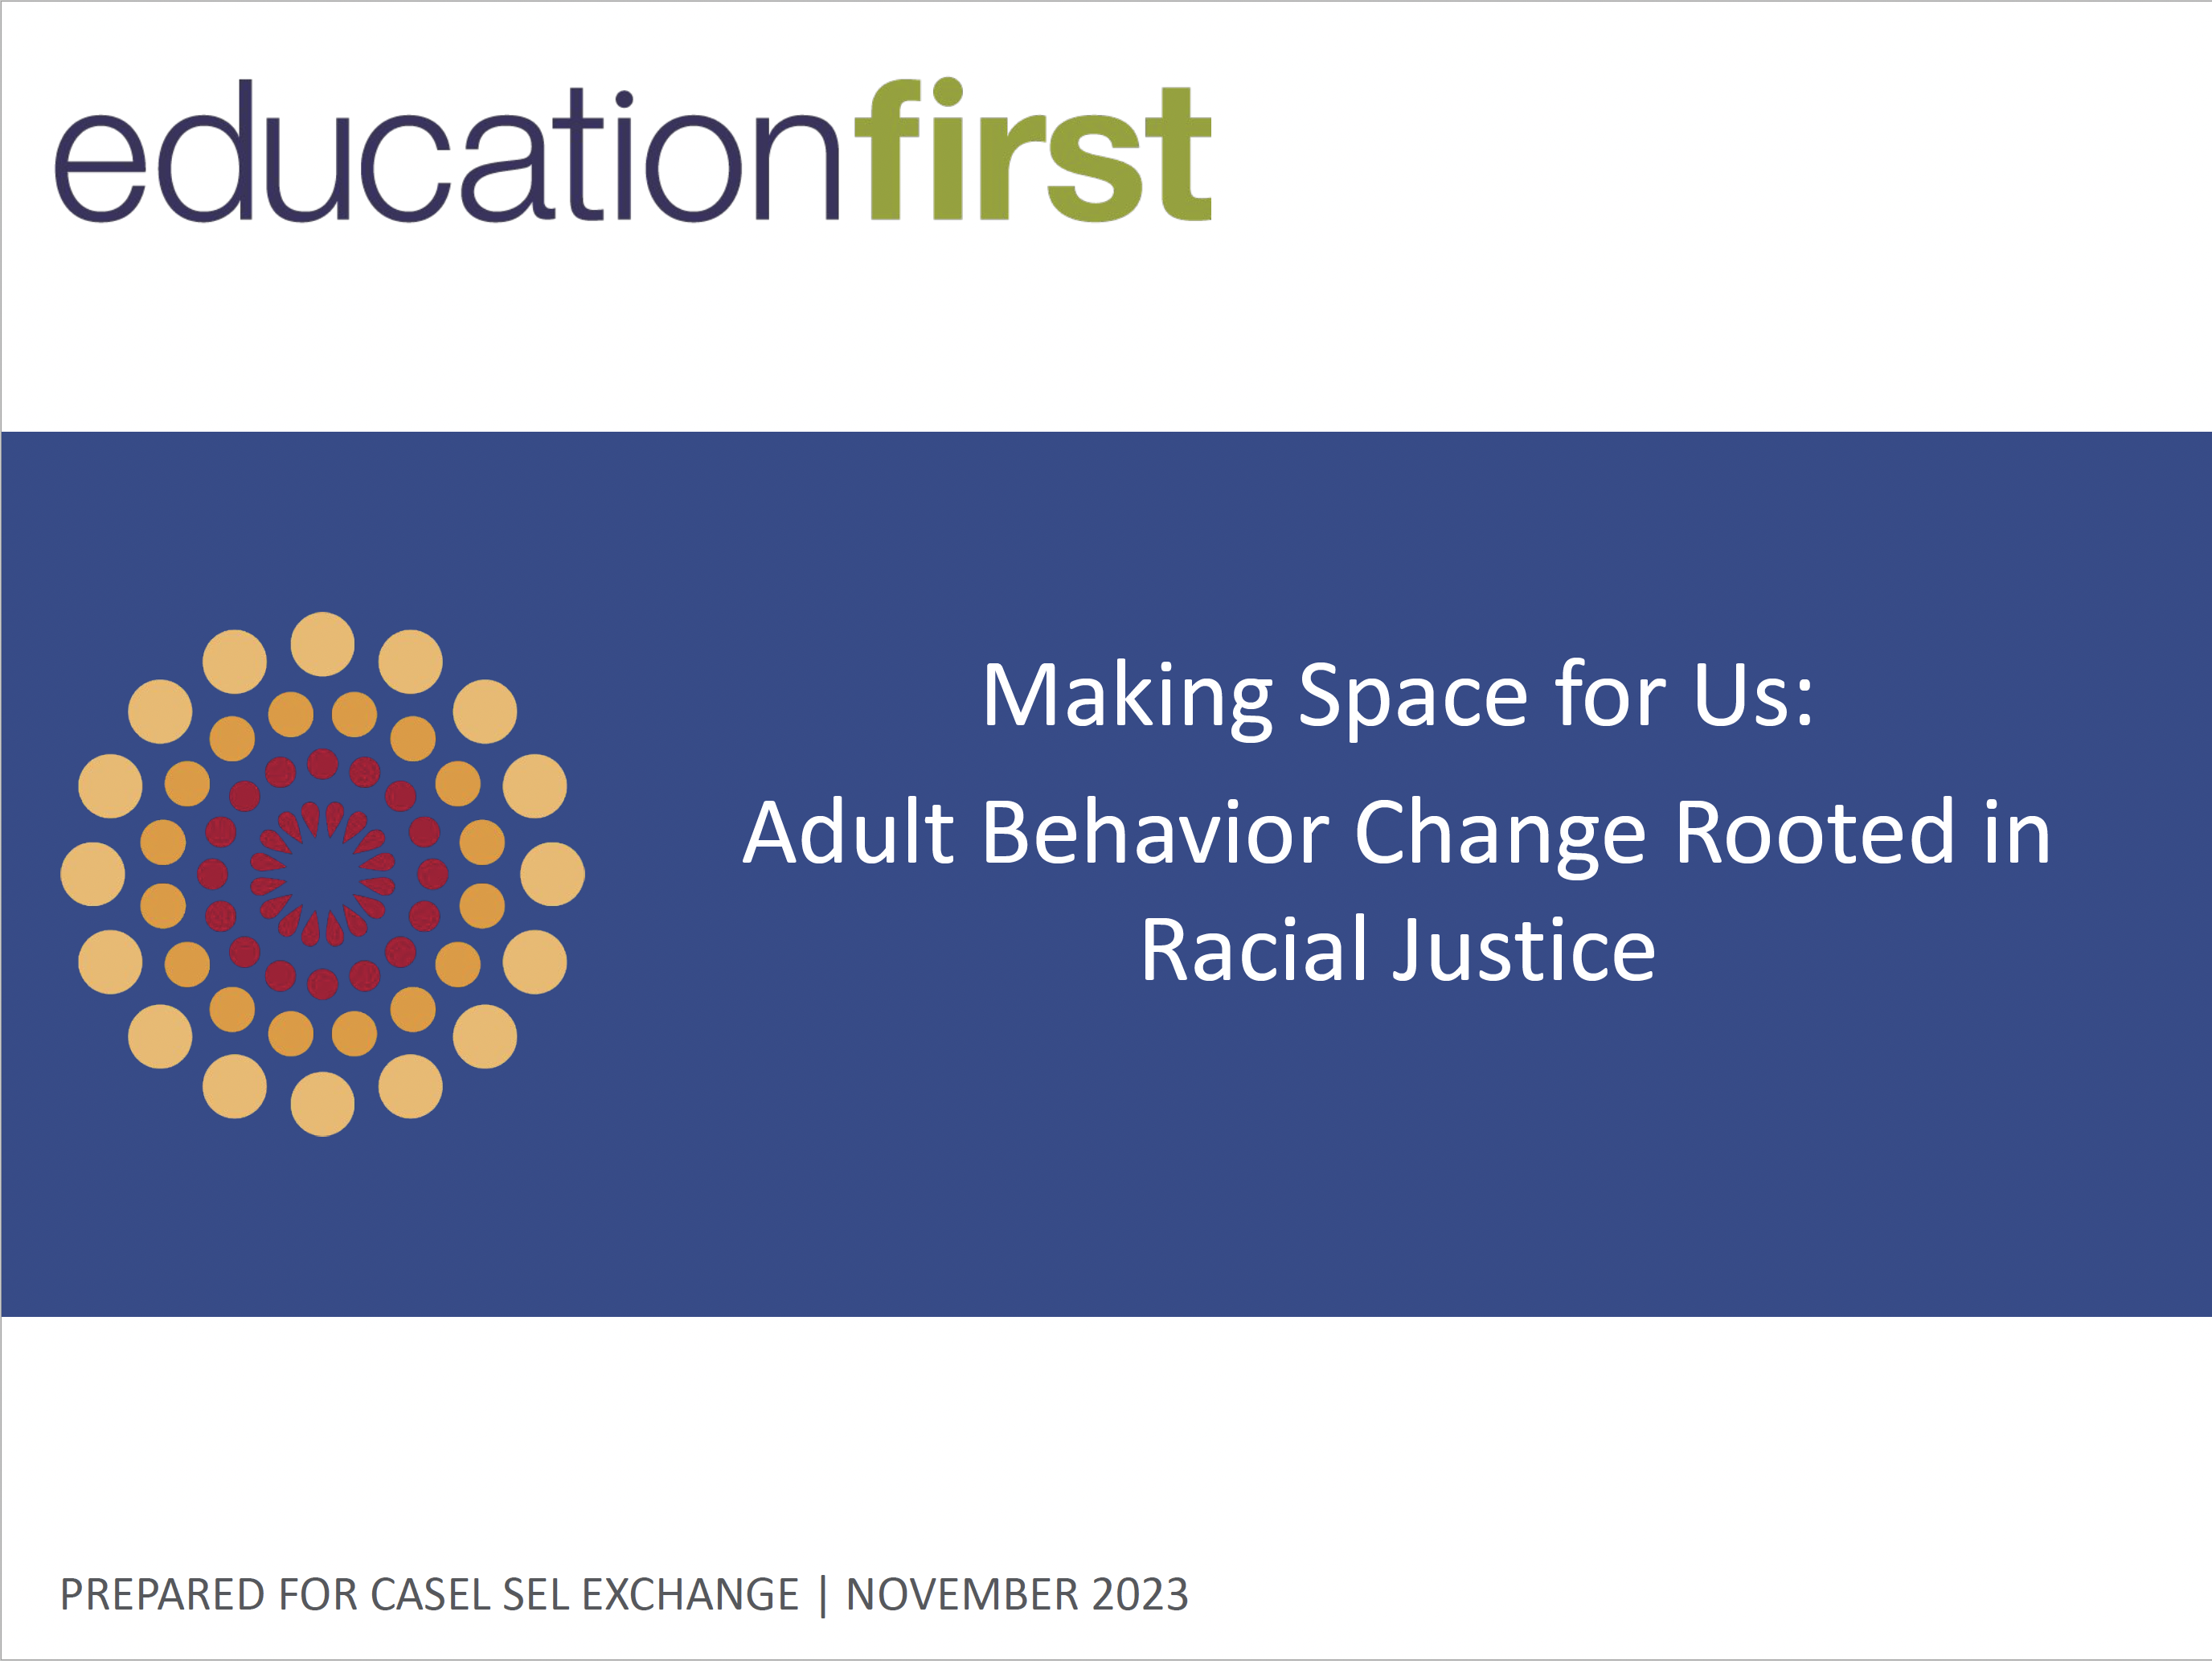 Making Space for Us: Adult Behavior Change Rooted in Racial Justice